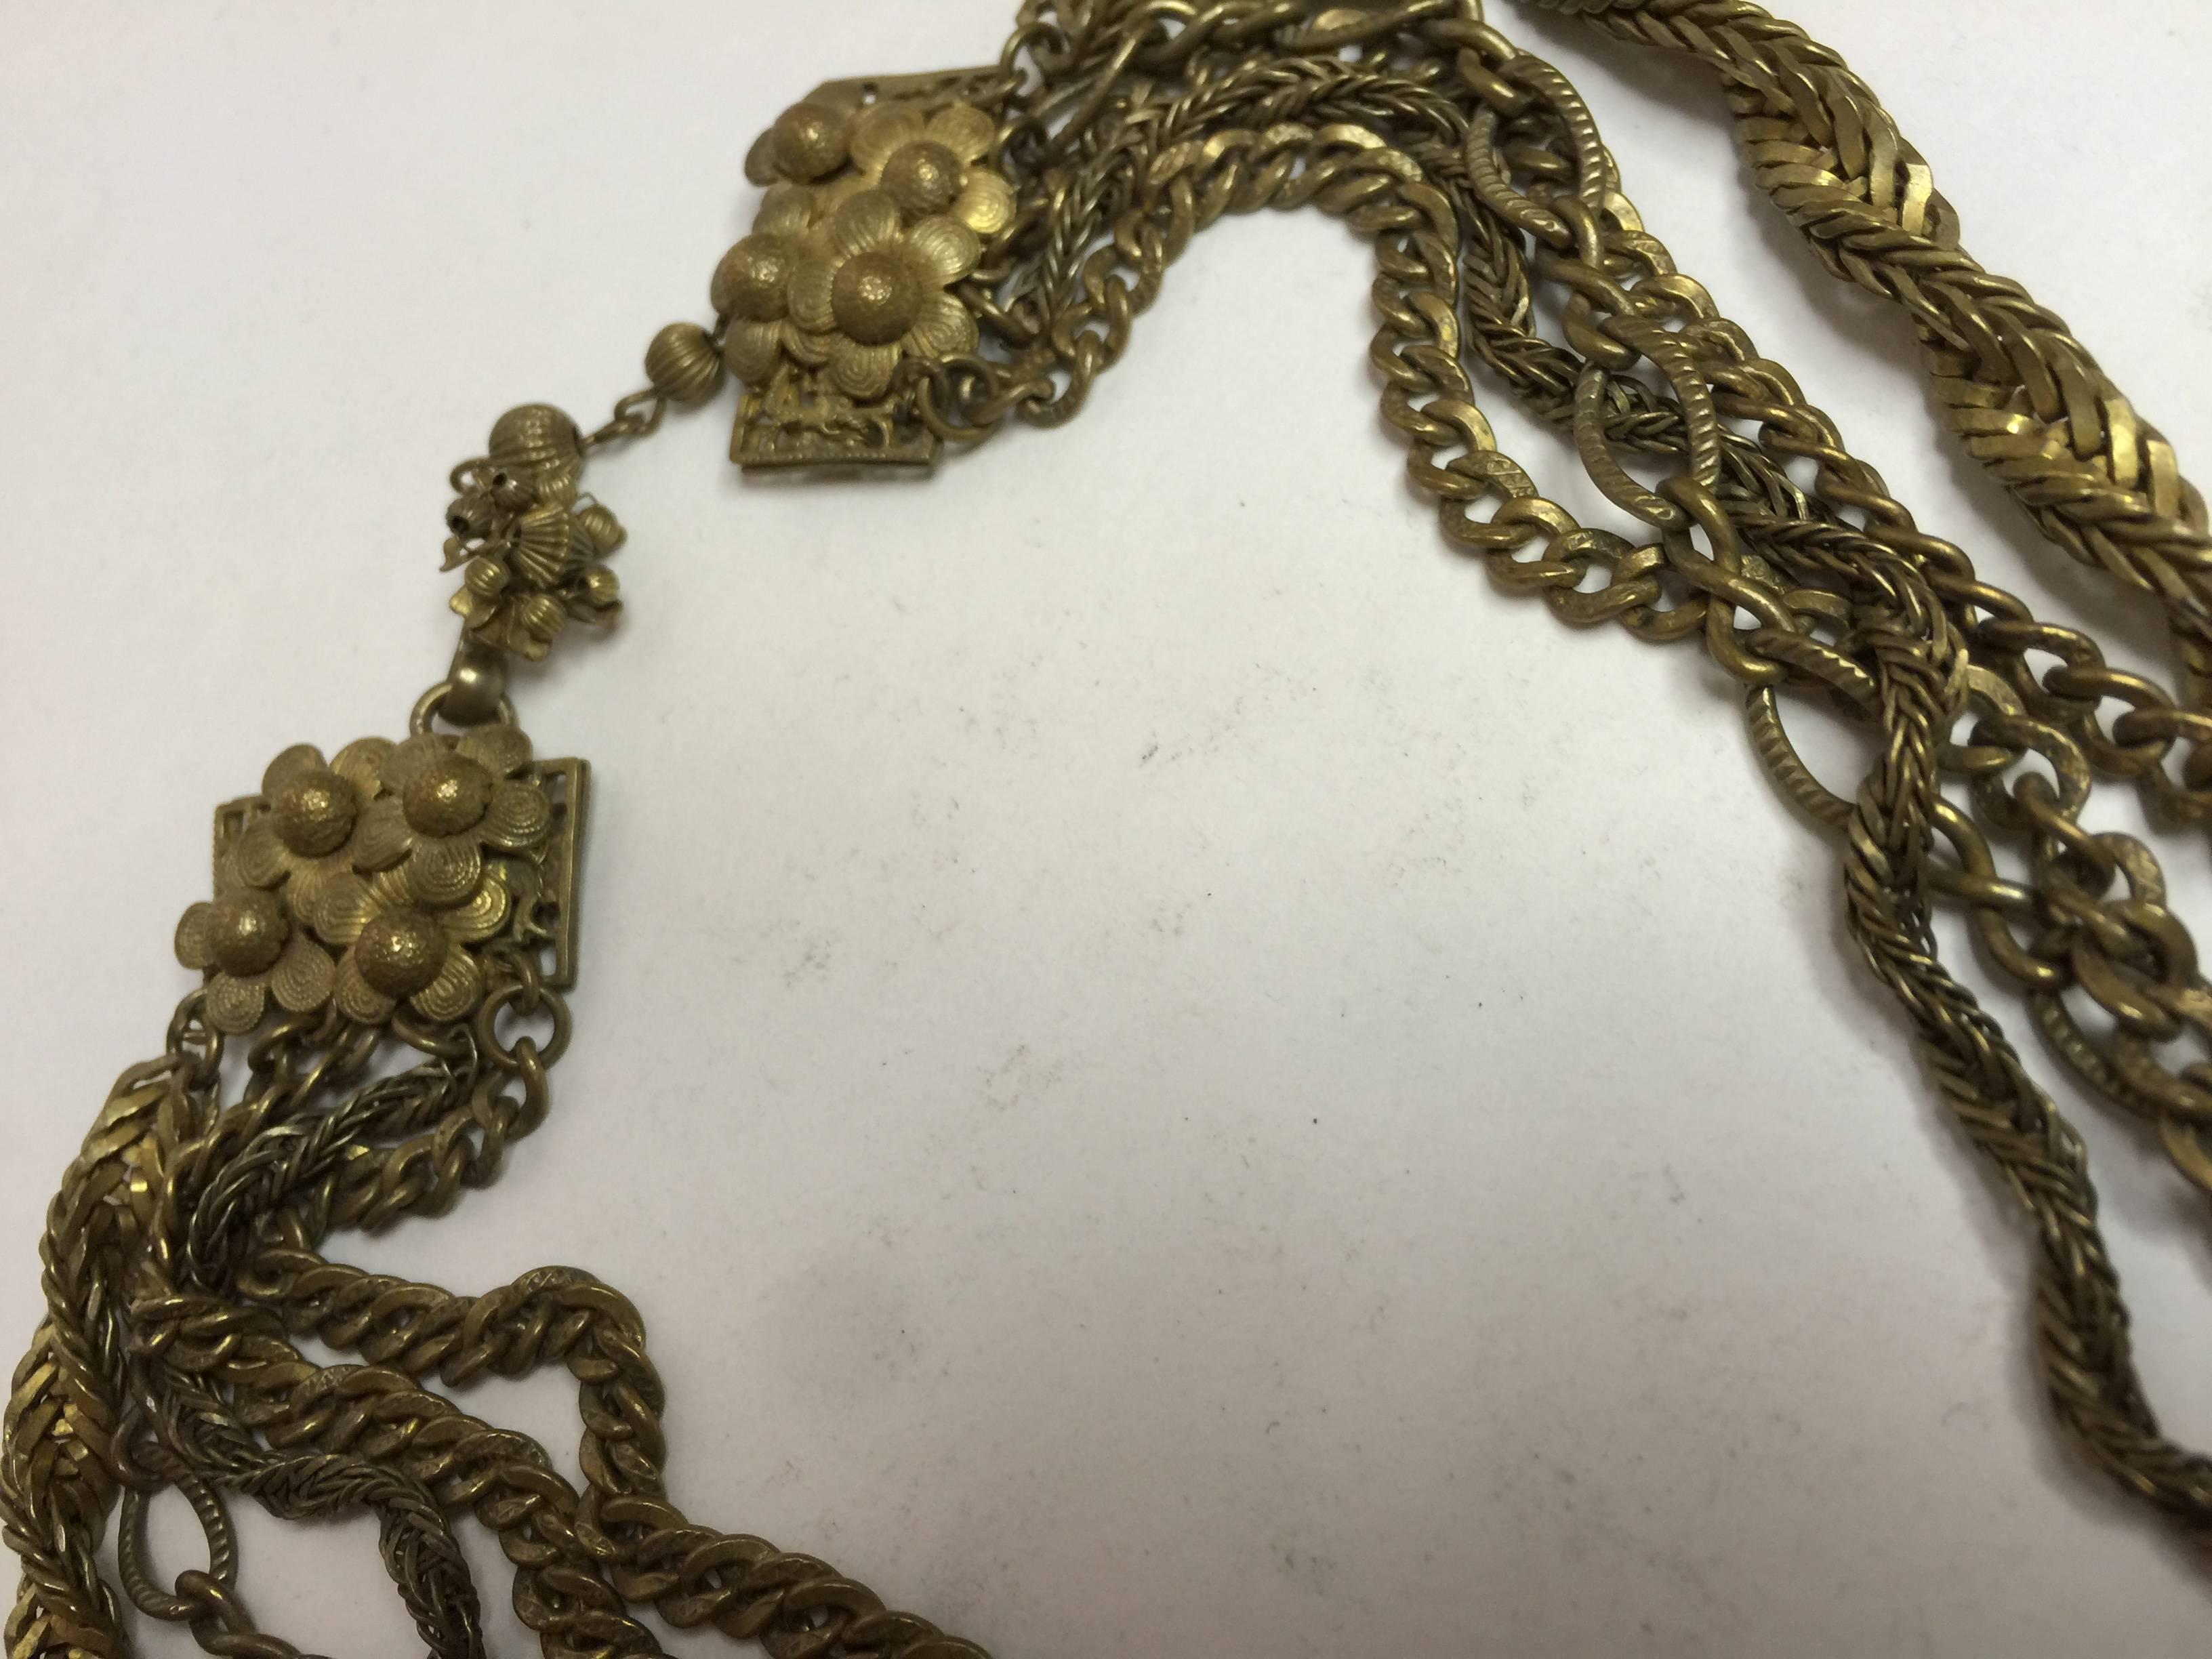 Women's 1950s MIRIAM HASKELL Antiqued Goldtone Multi-chain Necklace